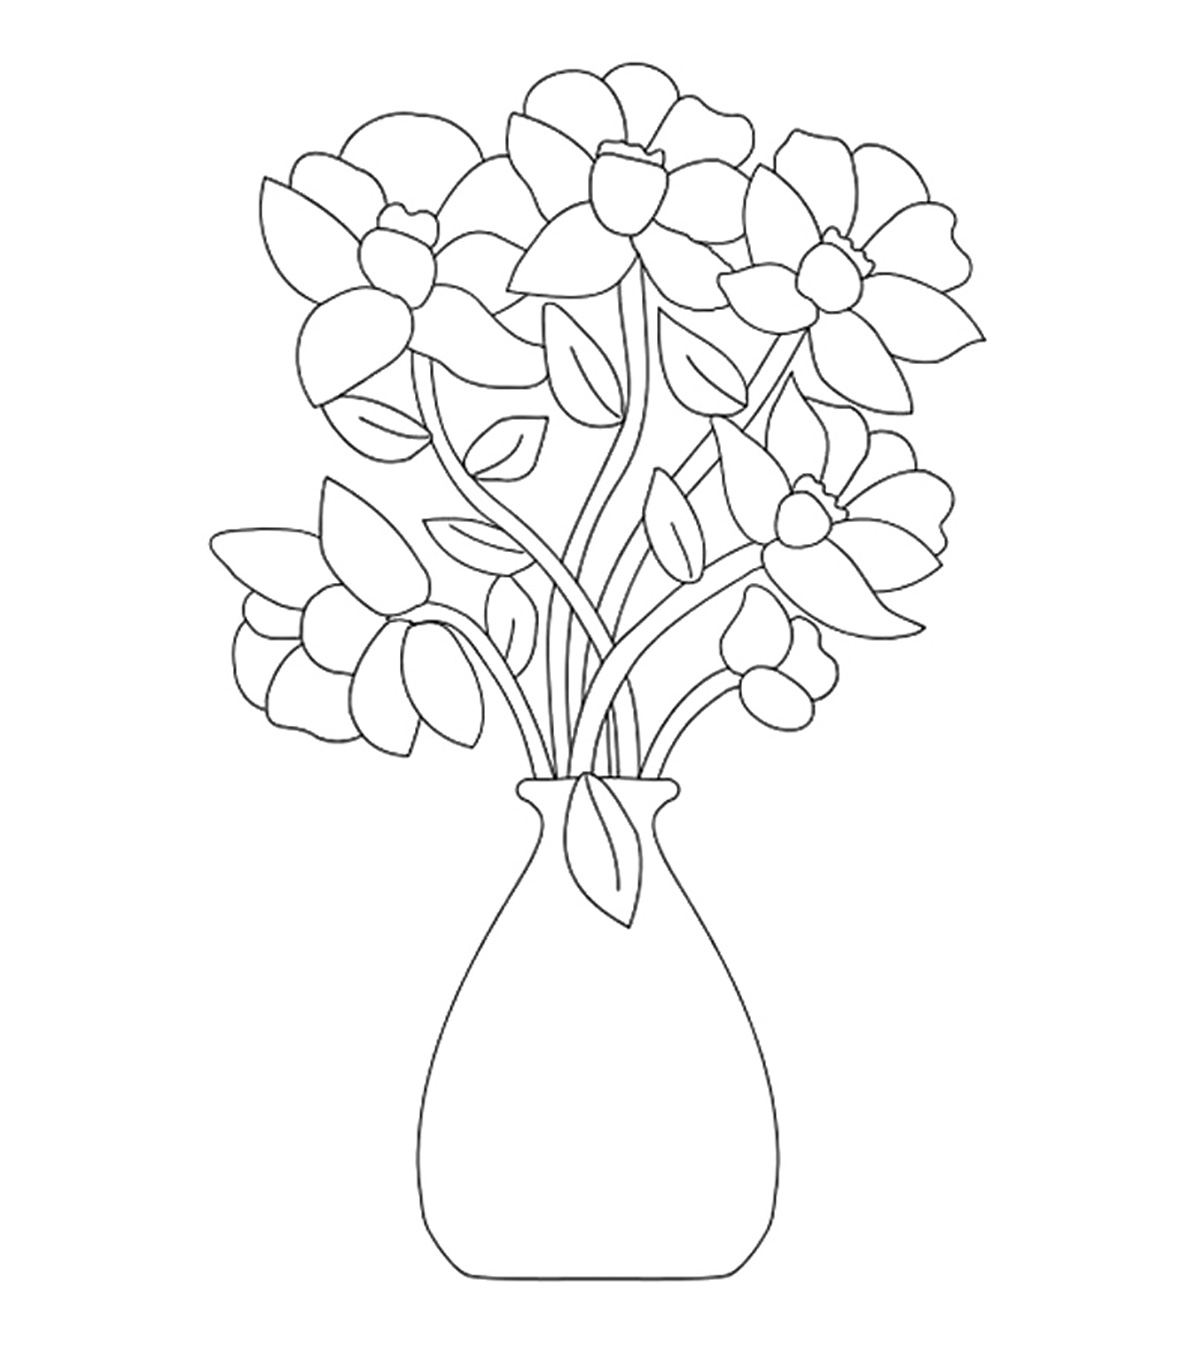 840 Top Coloring Pages Of Flower Petals Images & Pictures In HD